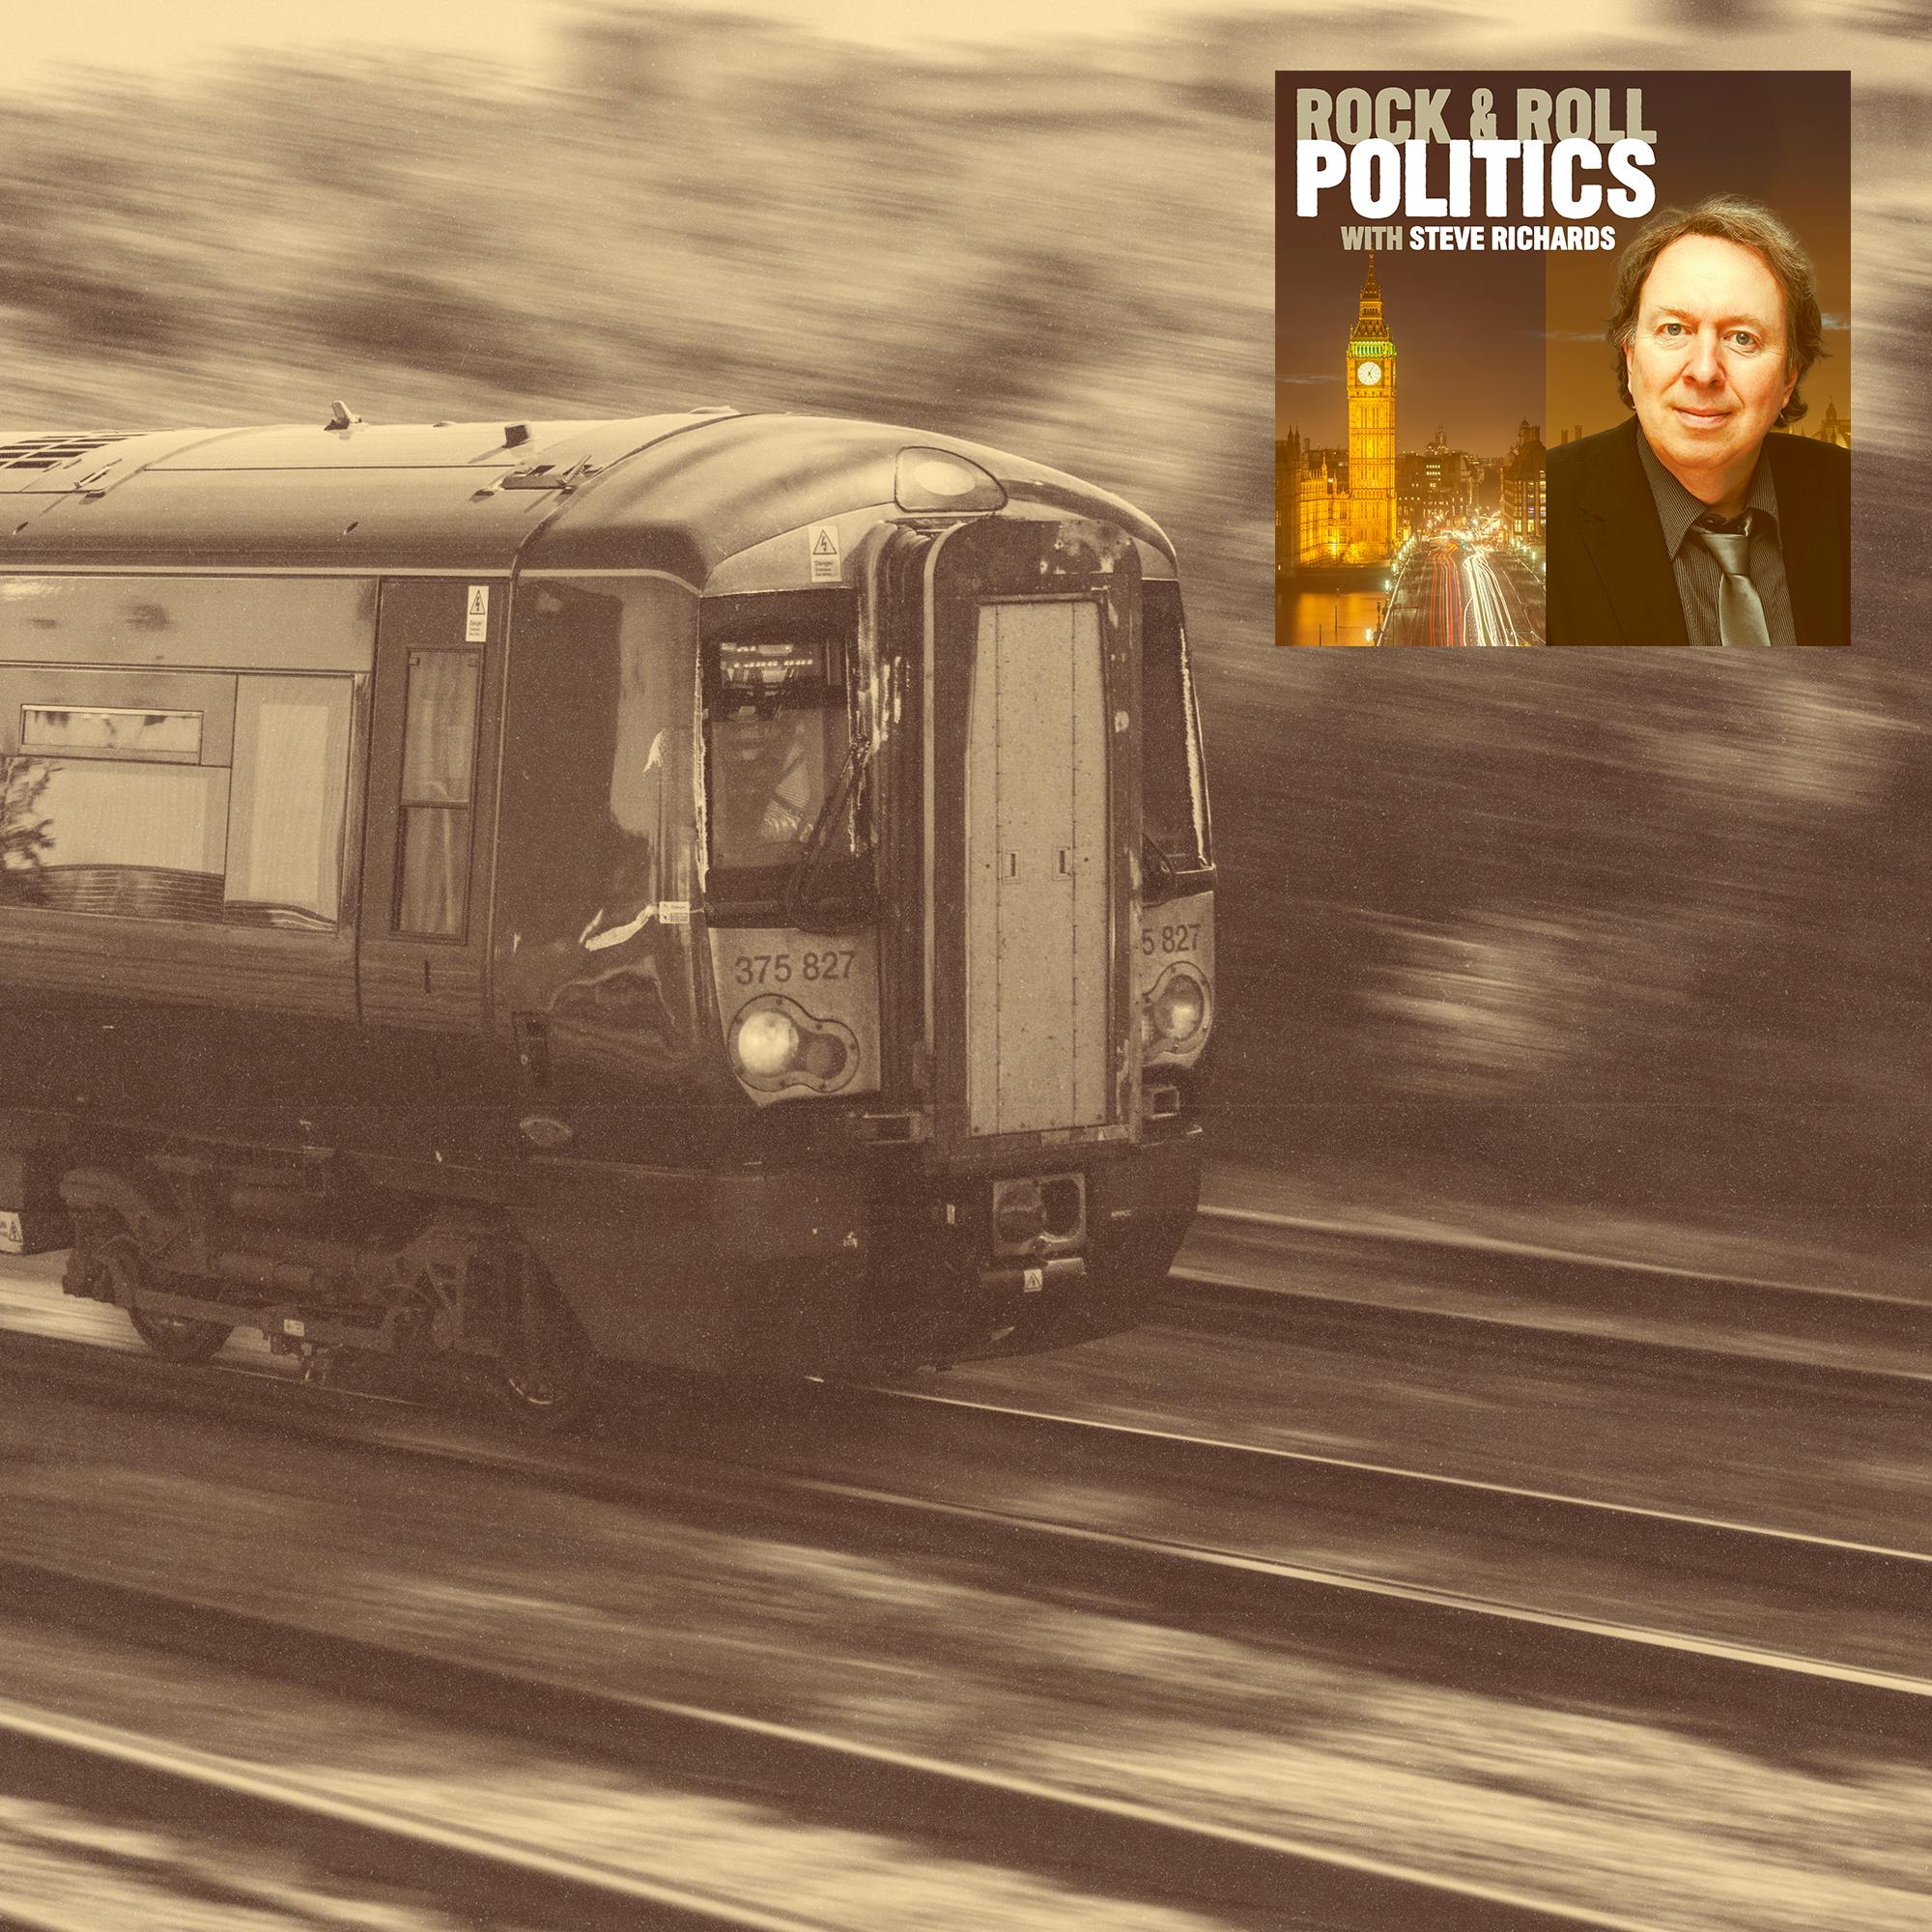 Christian Wolmar and The UK’s Chaotic Railways